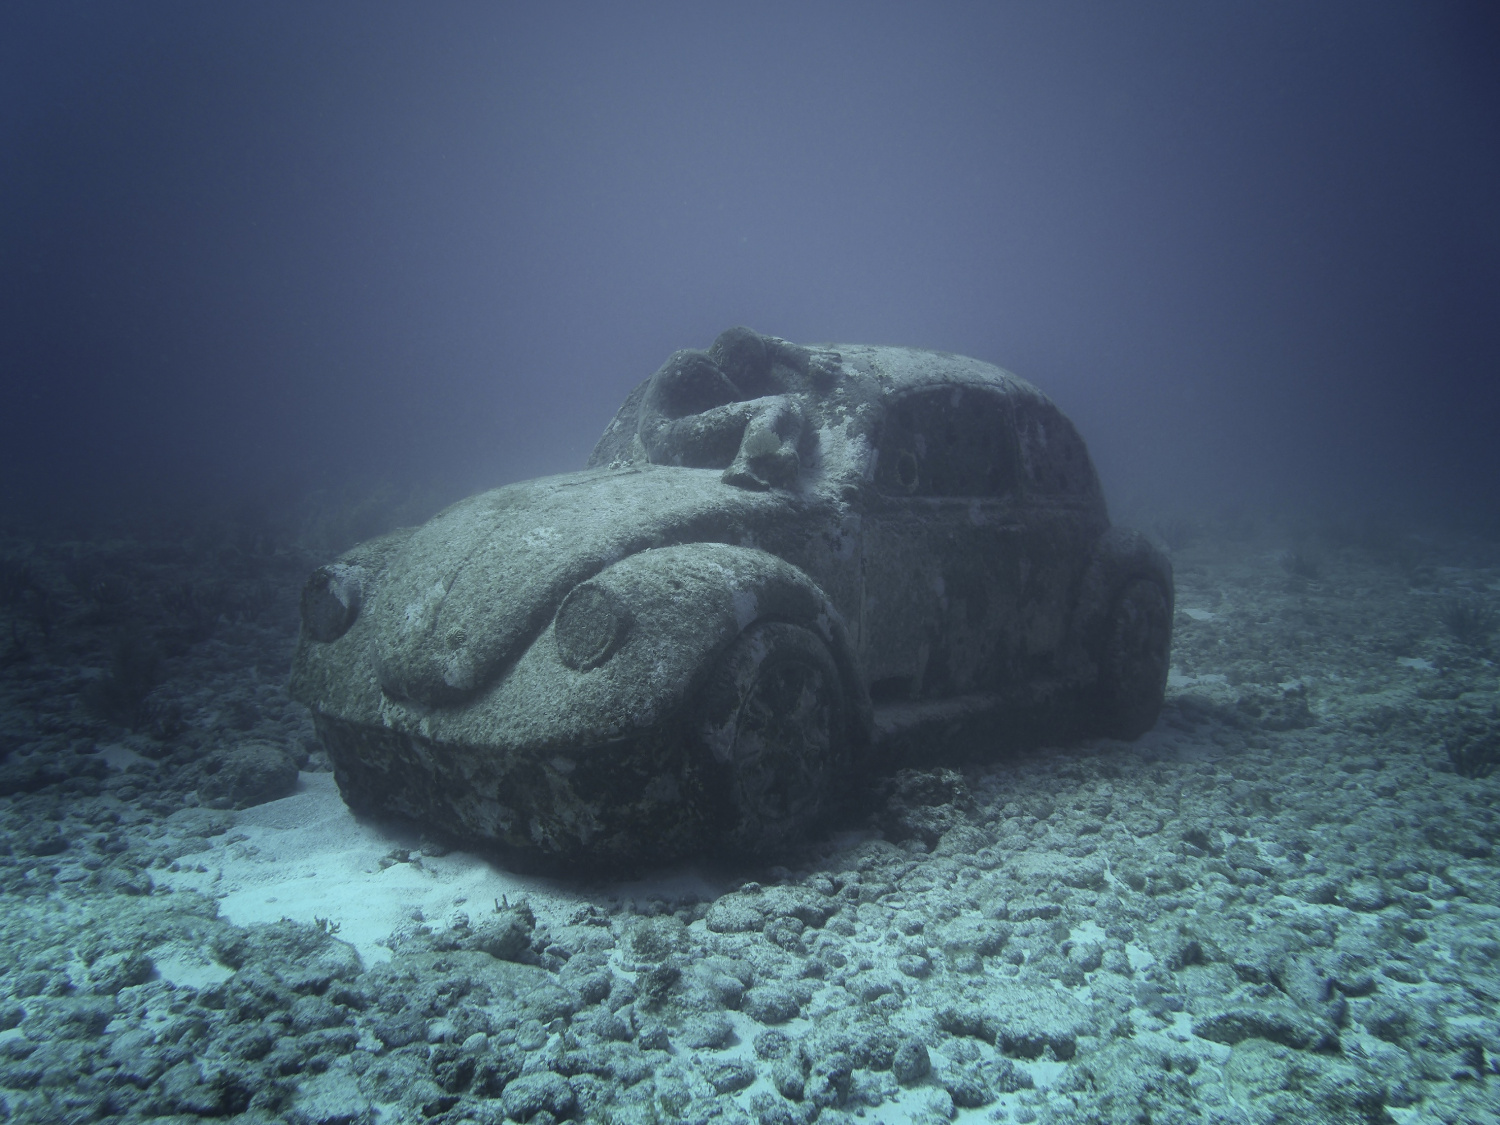 Jason deCaires Taylor's cement VW beetle sculpture added to Cancun's artificial reef